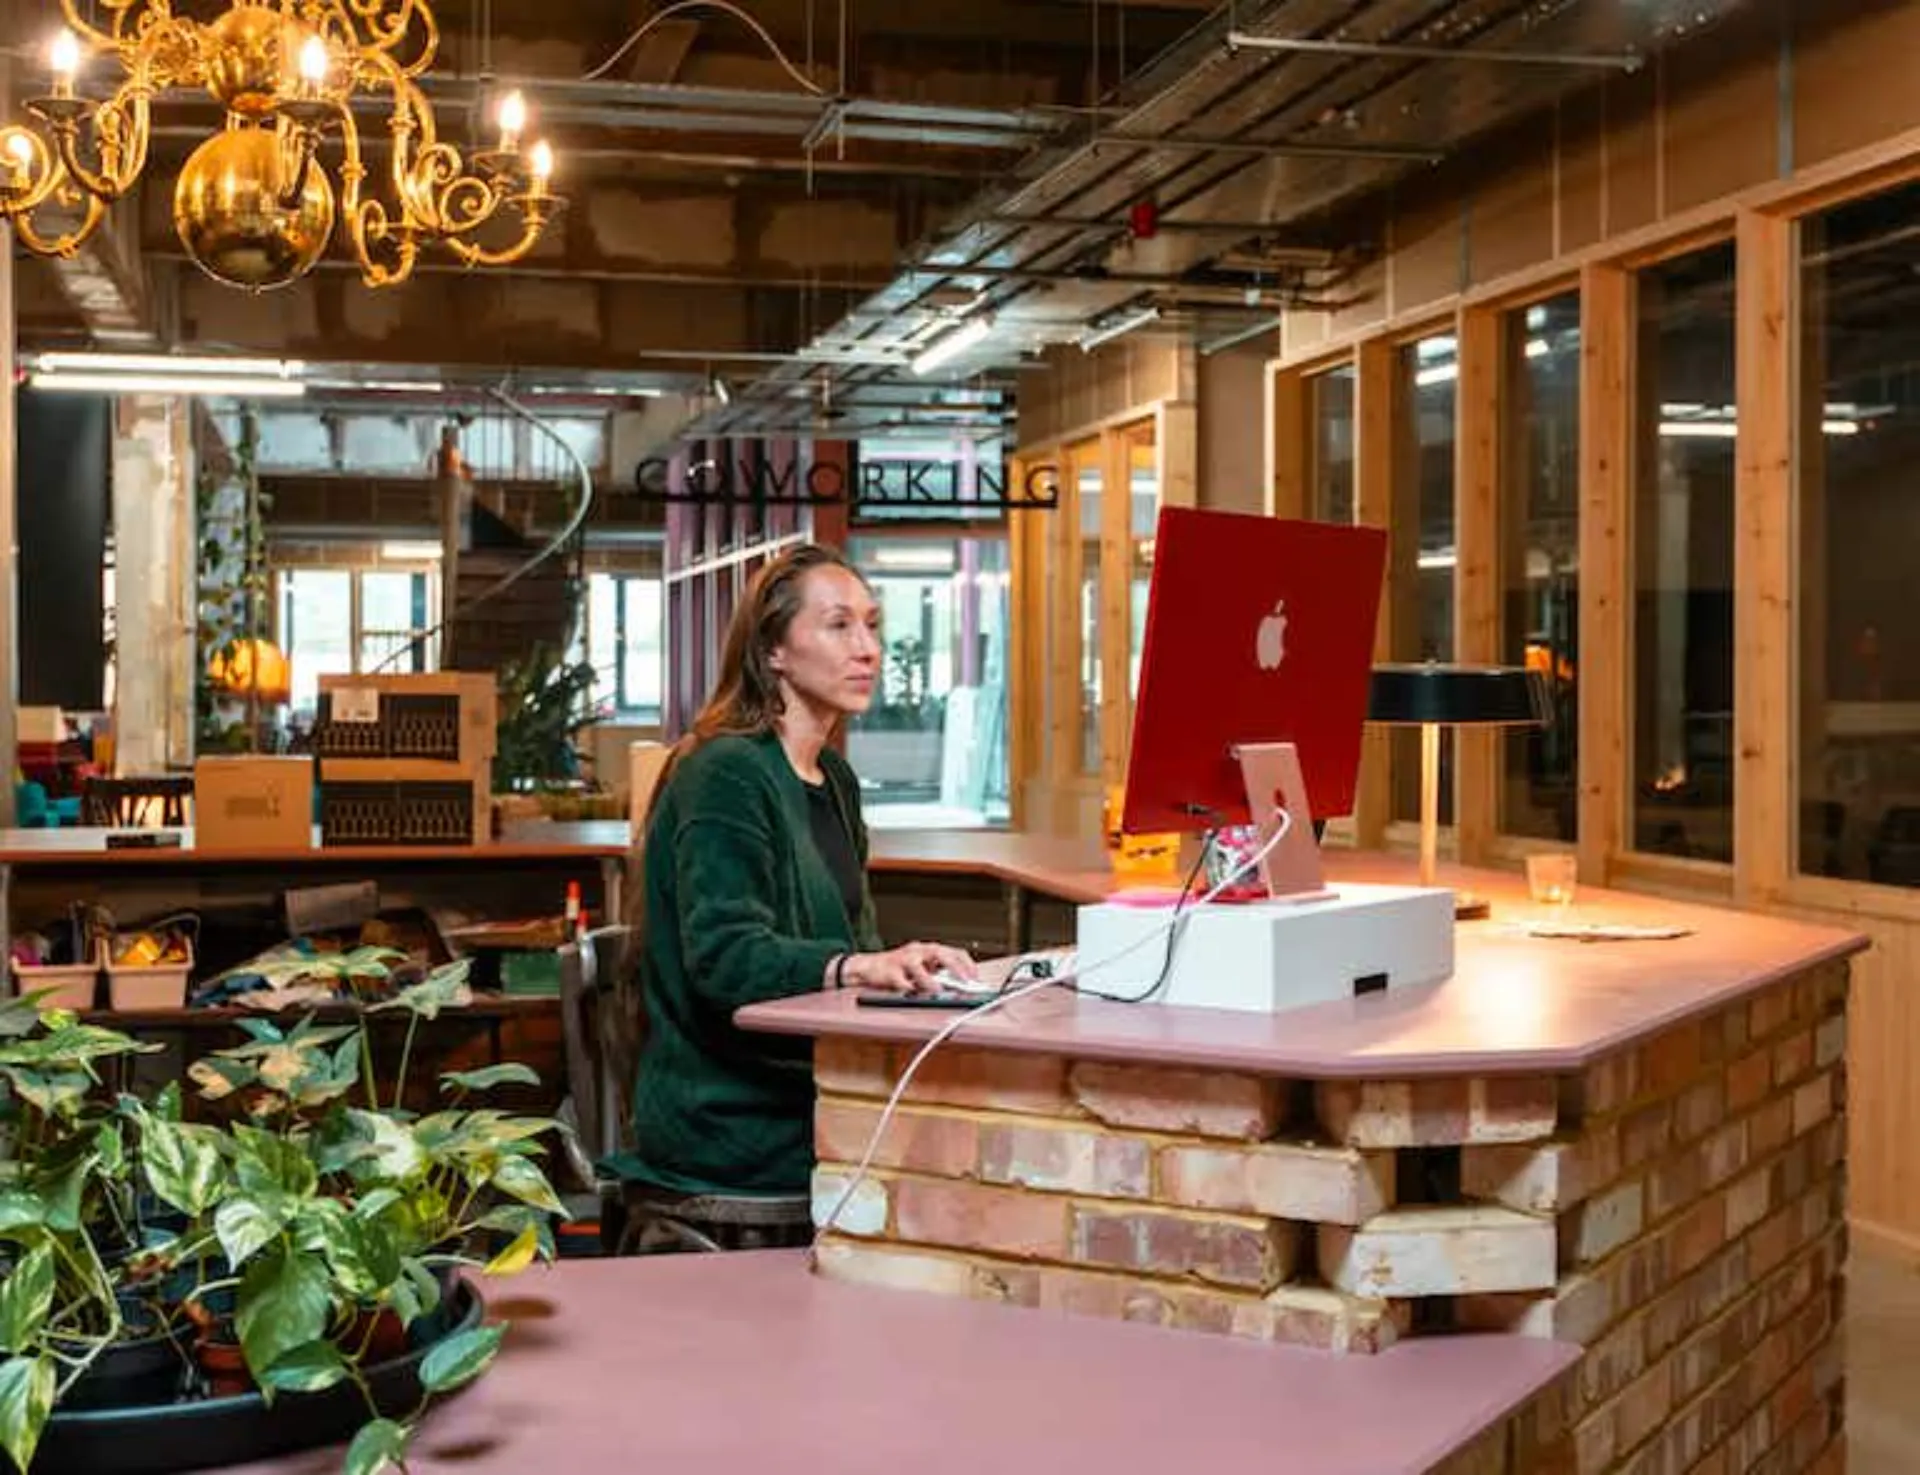 Oru Co-working space Desks day pass bookings victoria 